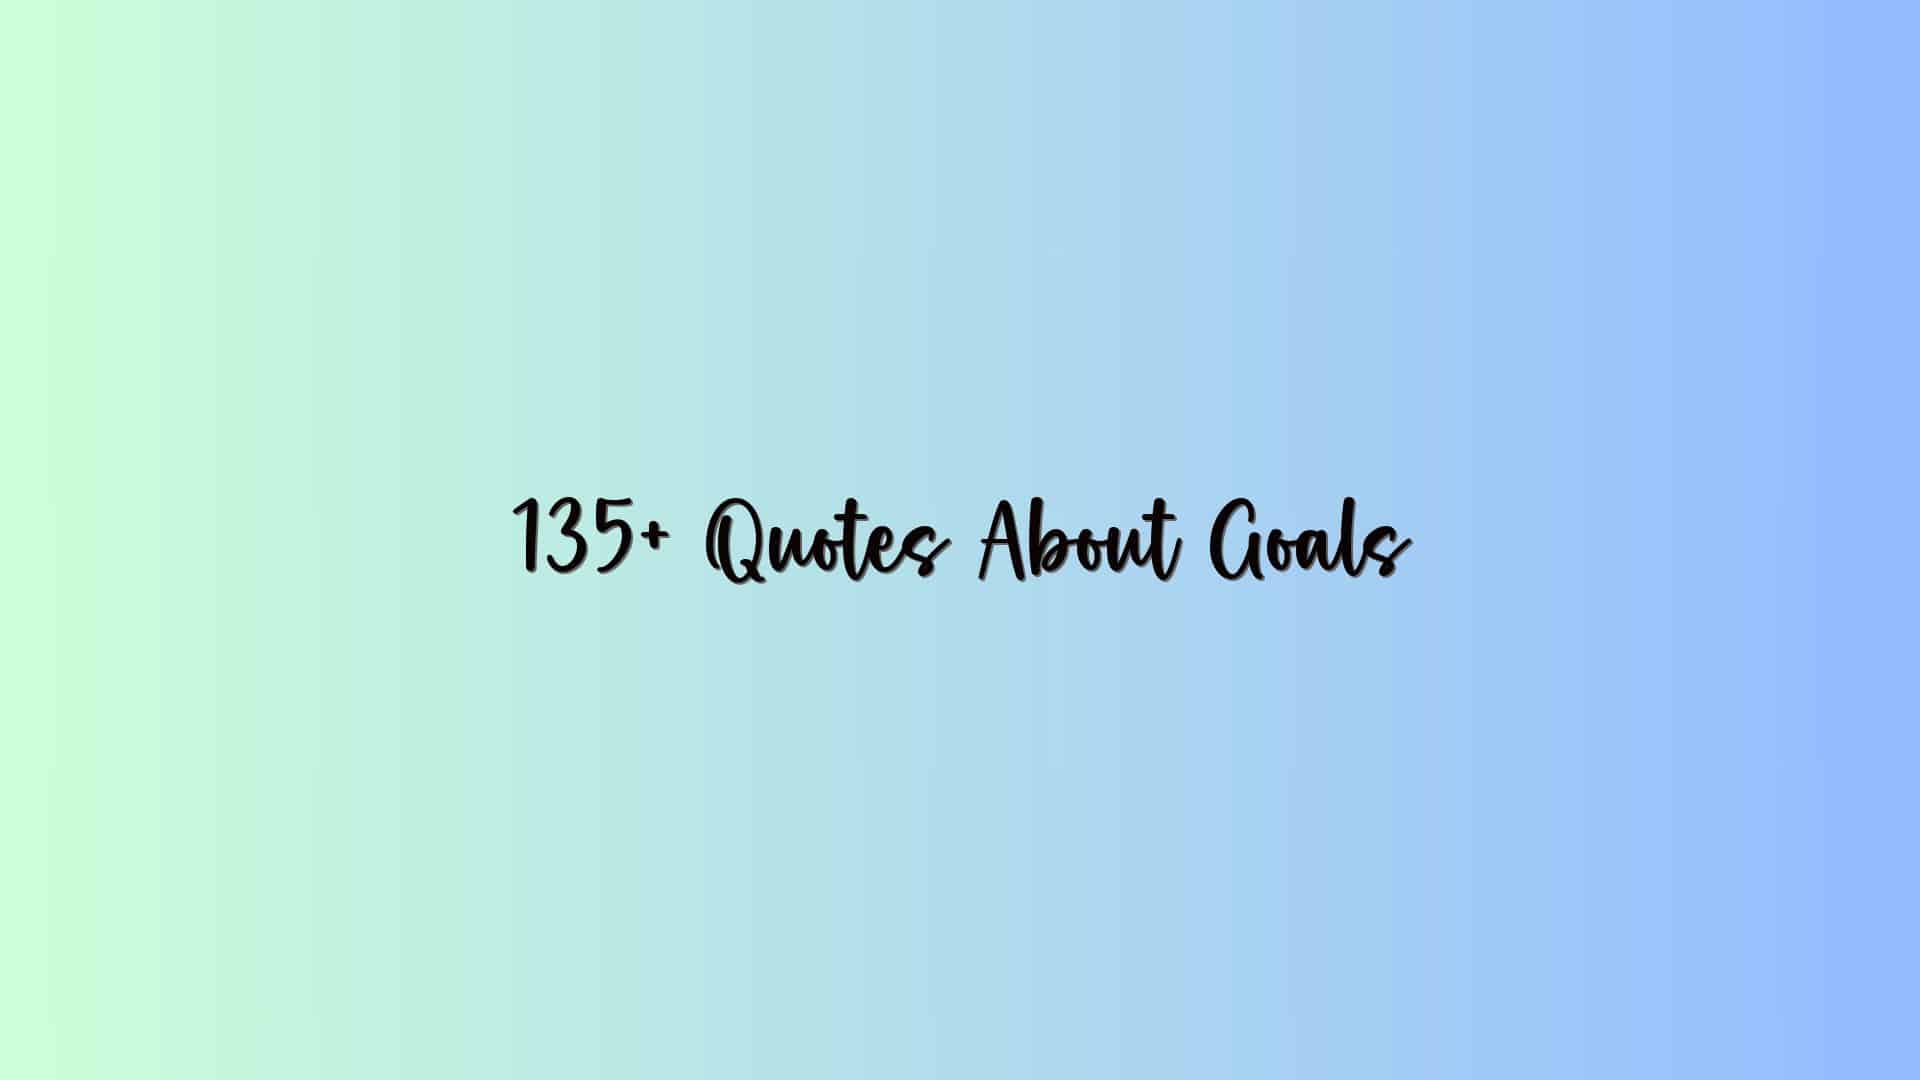 135+ Quotes About Goals